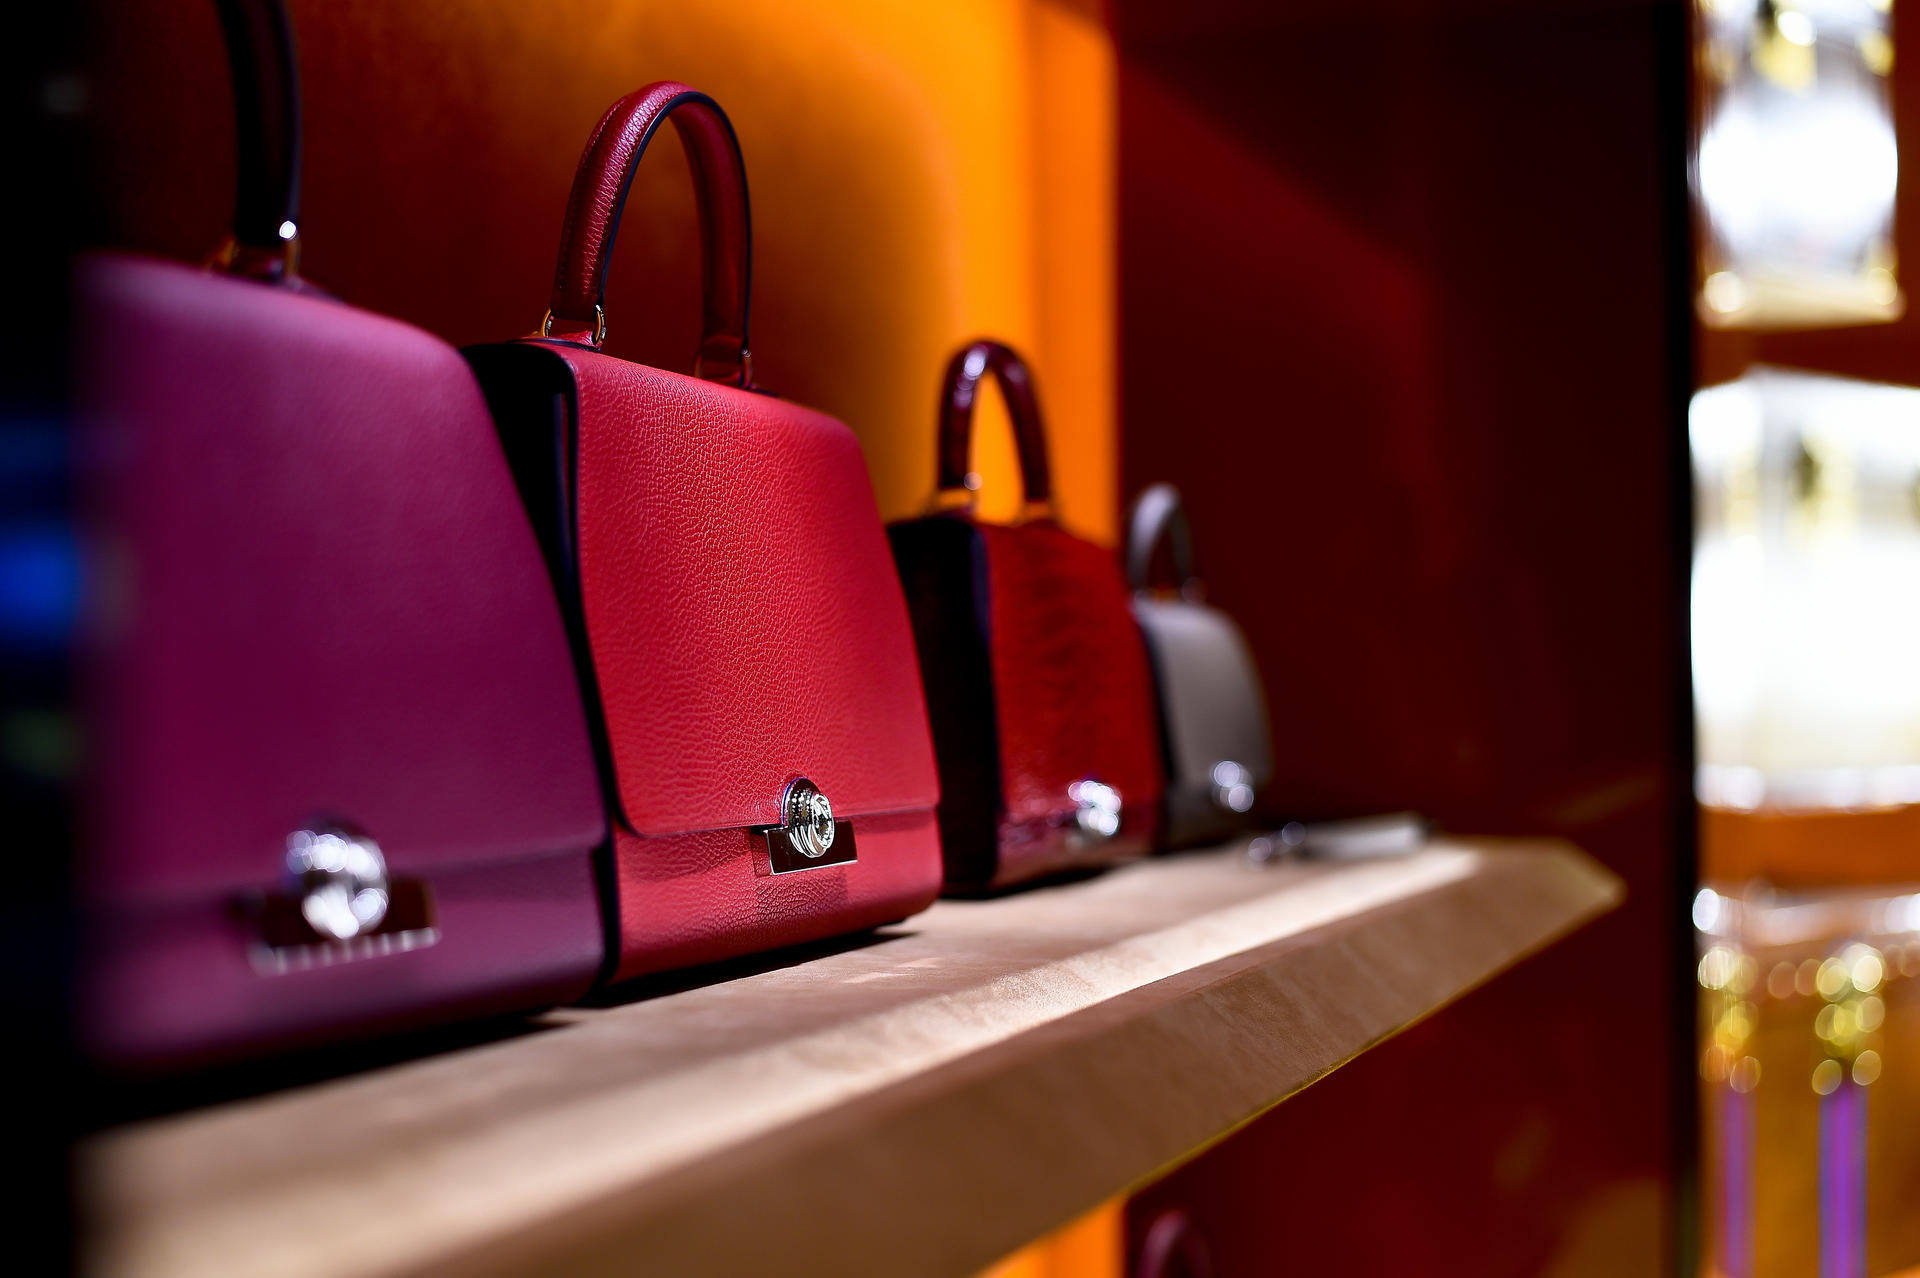 Moynat Pays Homage To Its Trunk-Making Heritage With The Sac Malle -  BAGAHOLICBOY